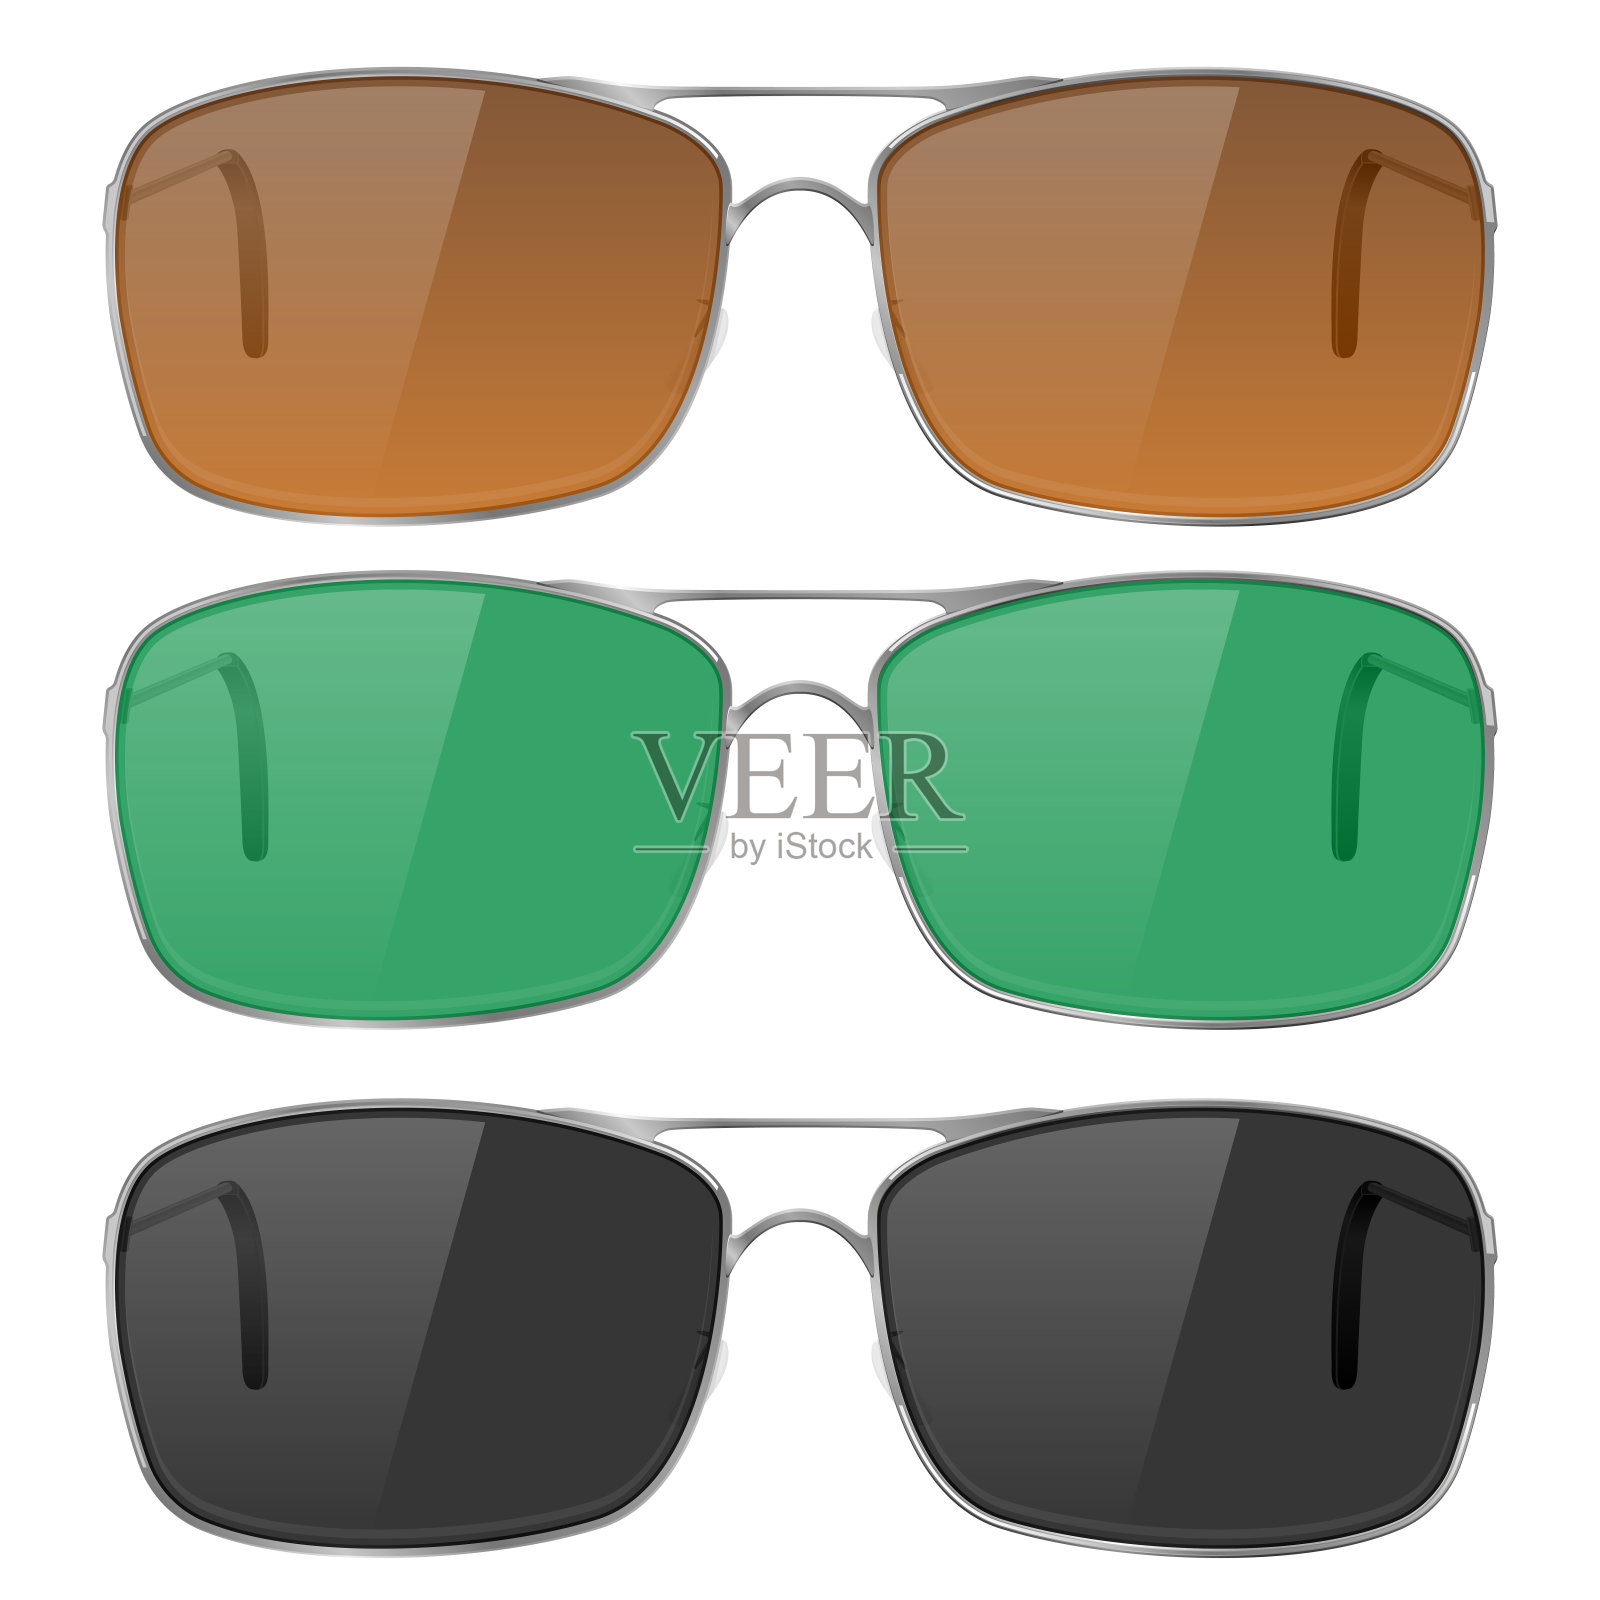 Sunglasses with colored lenses插画图片素材